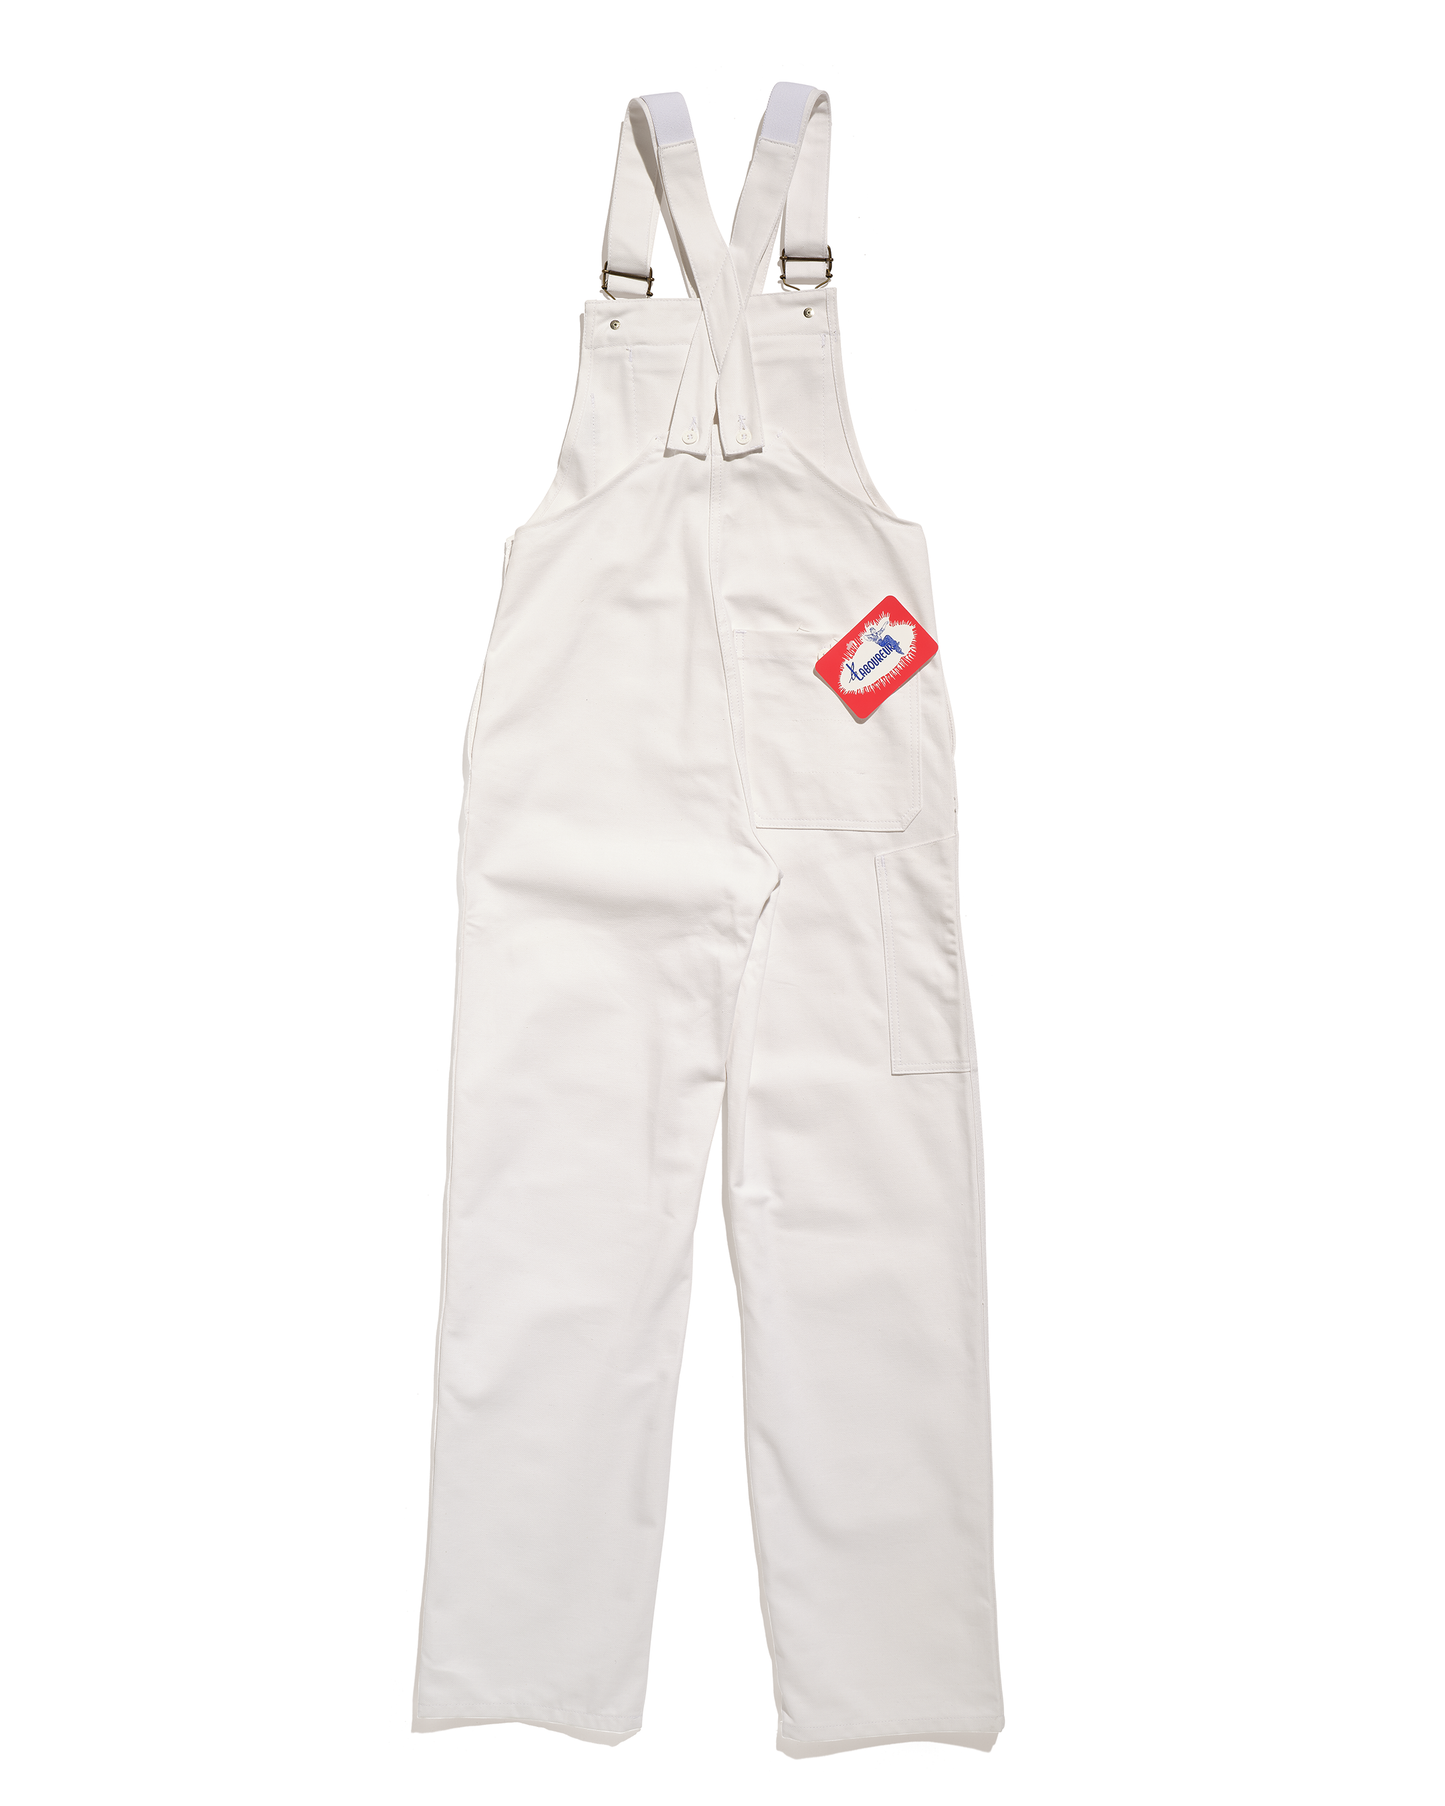 White work overalls with metal buckles